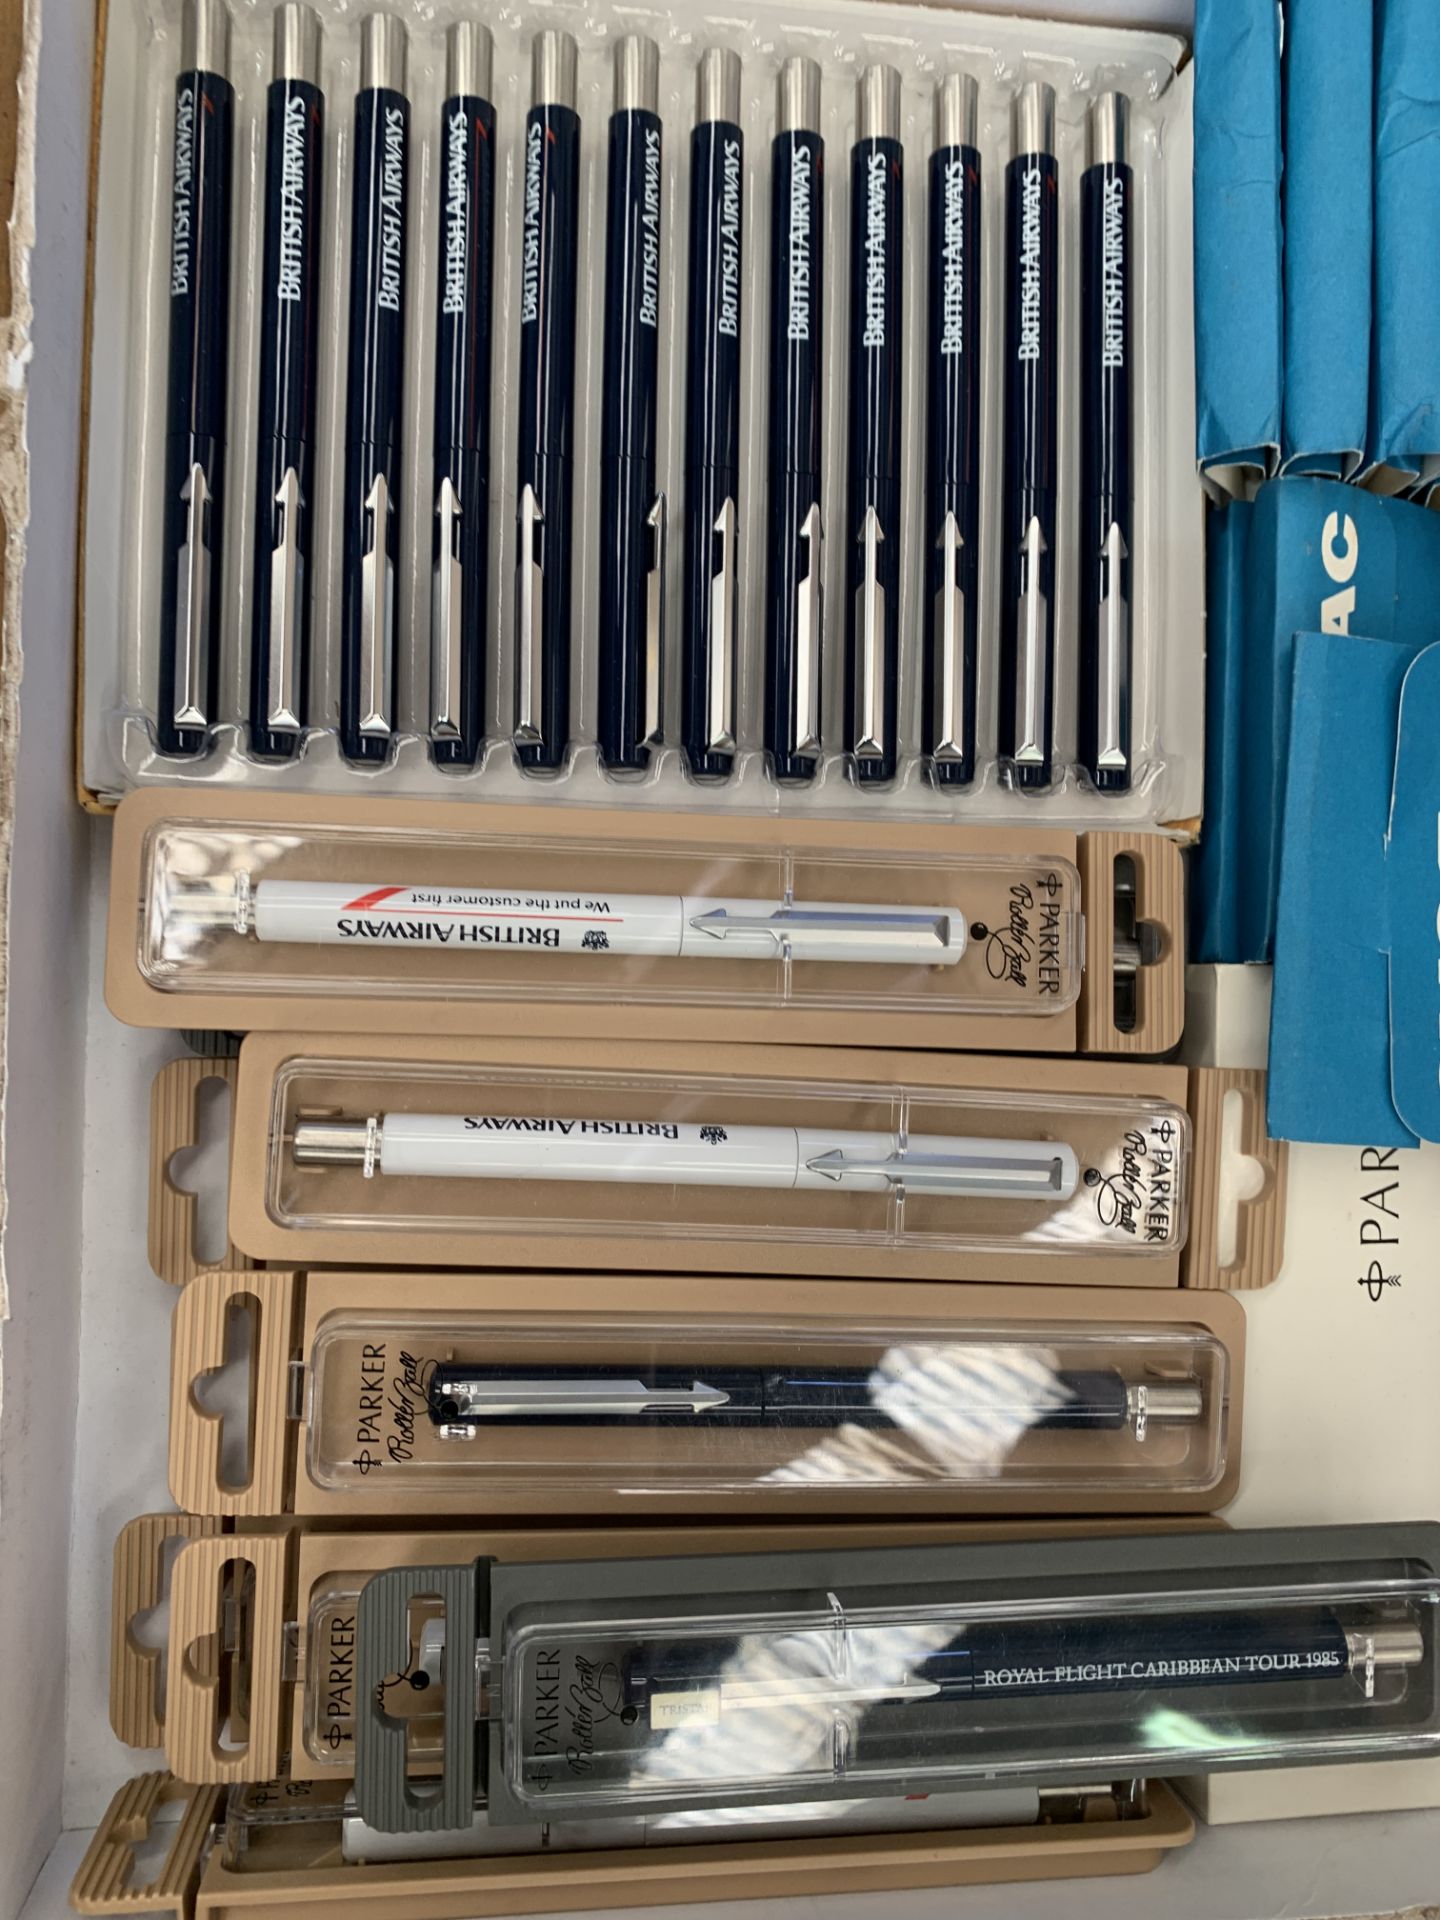 Collection of British Airways pens and BOAC golf tees - Image 2 of 4